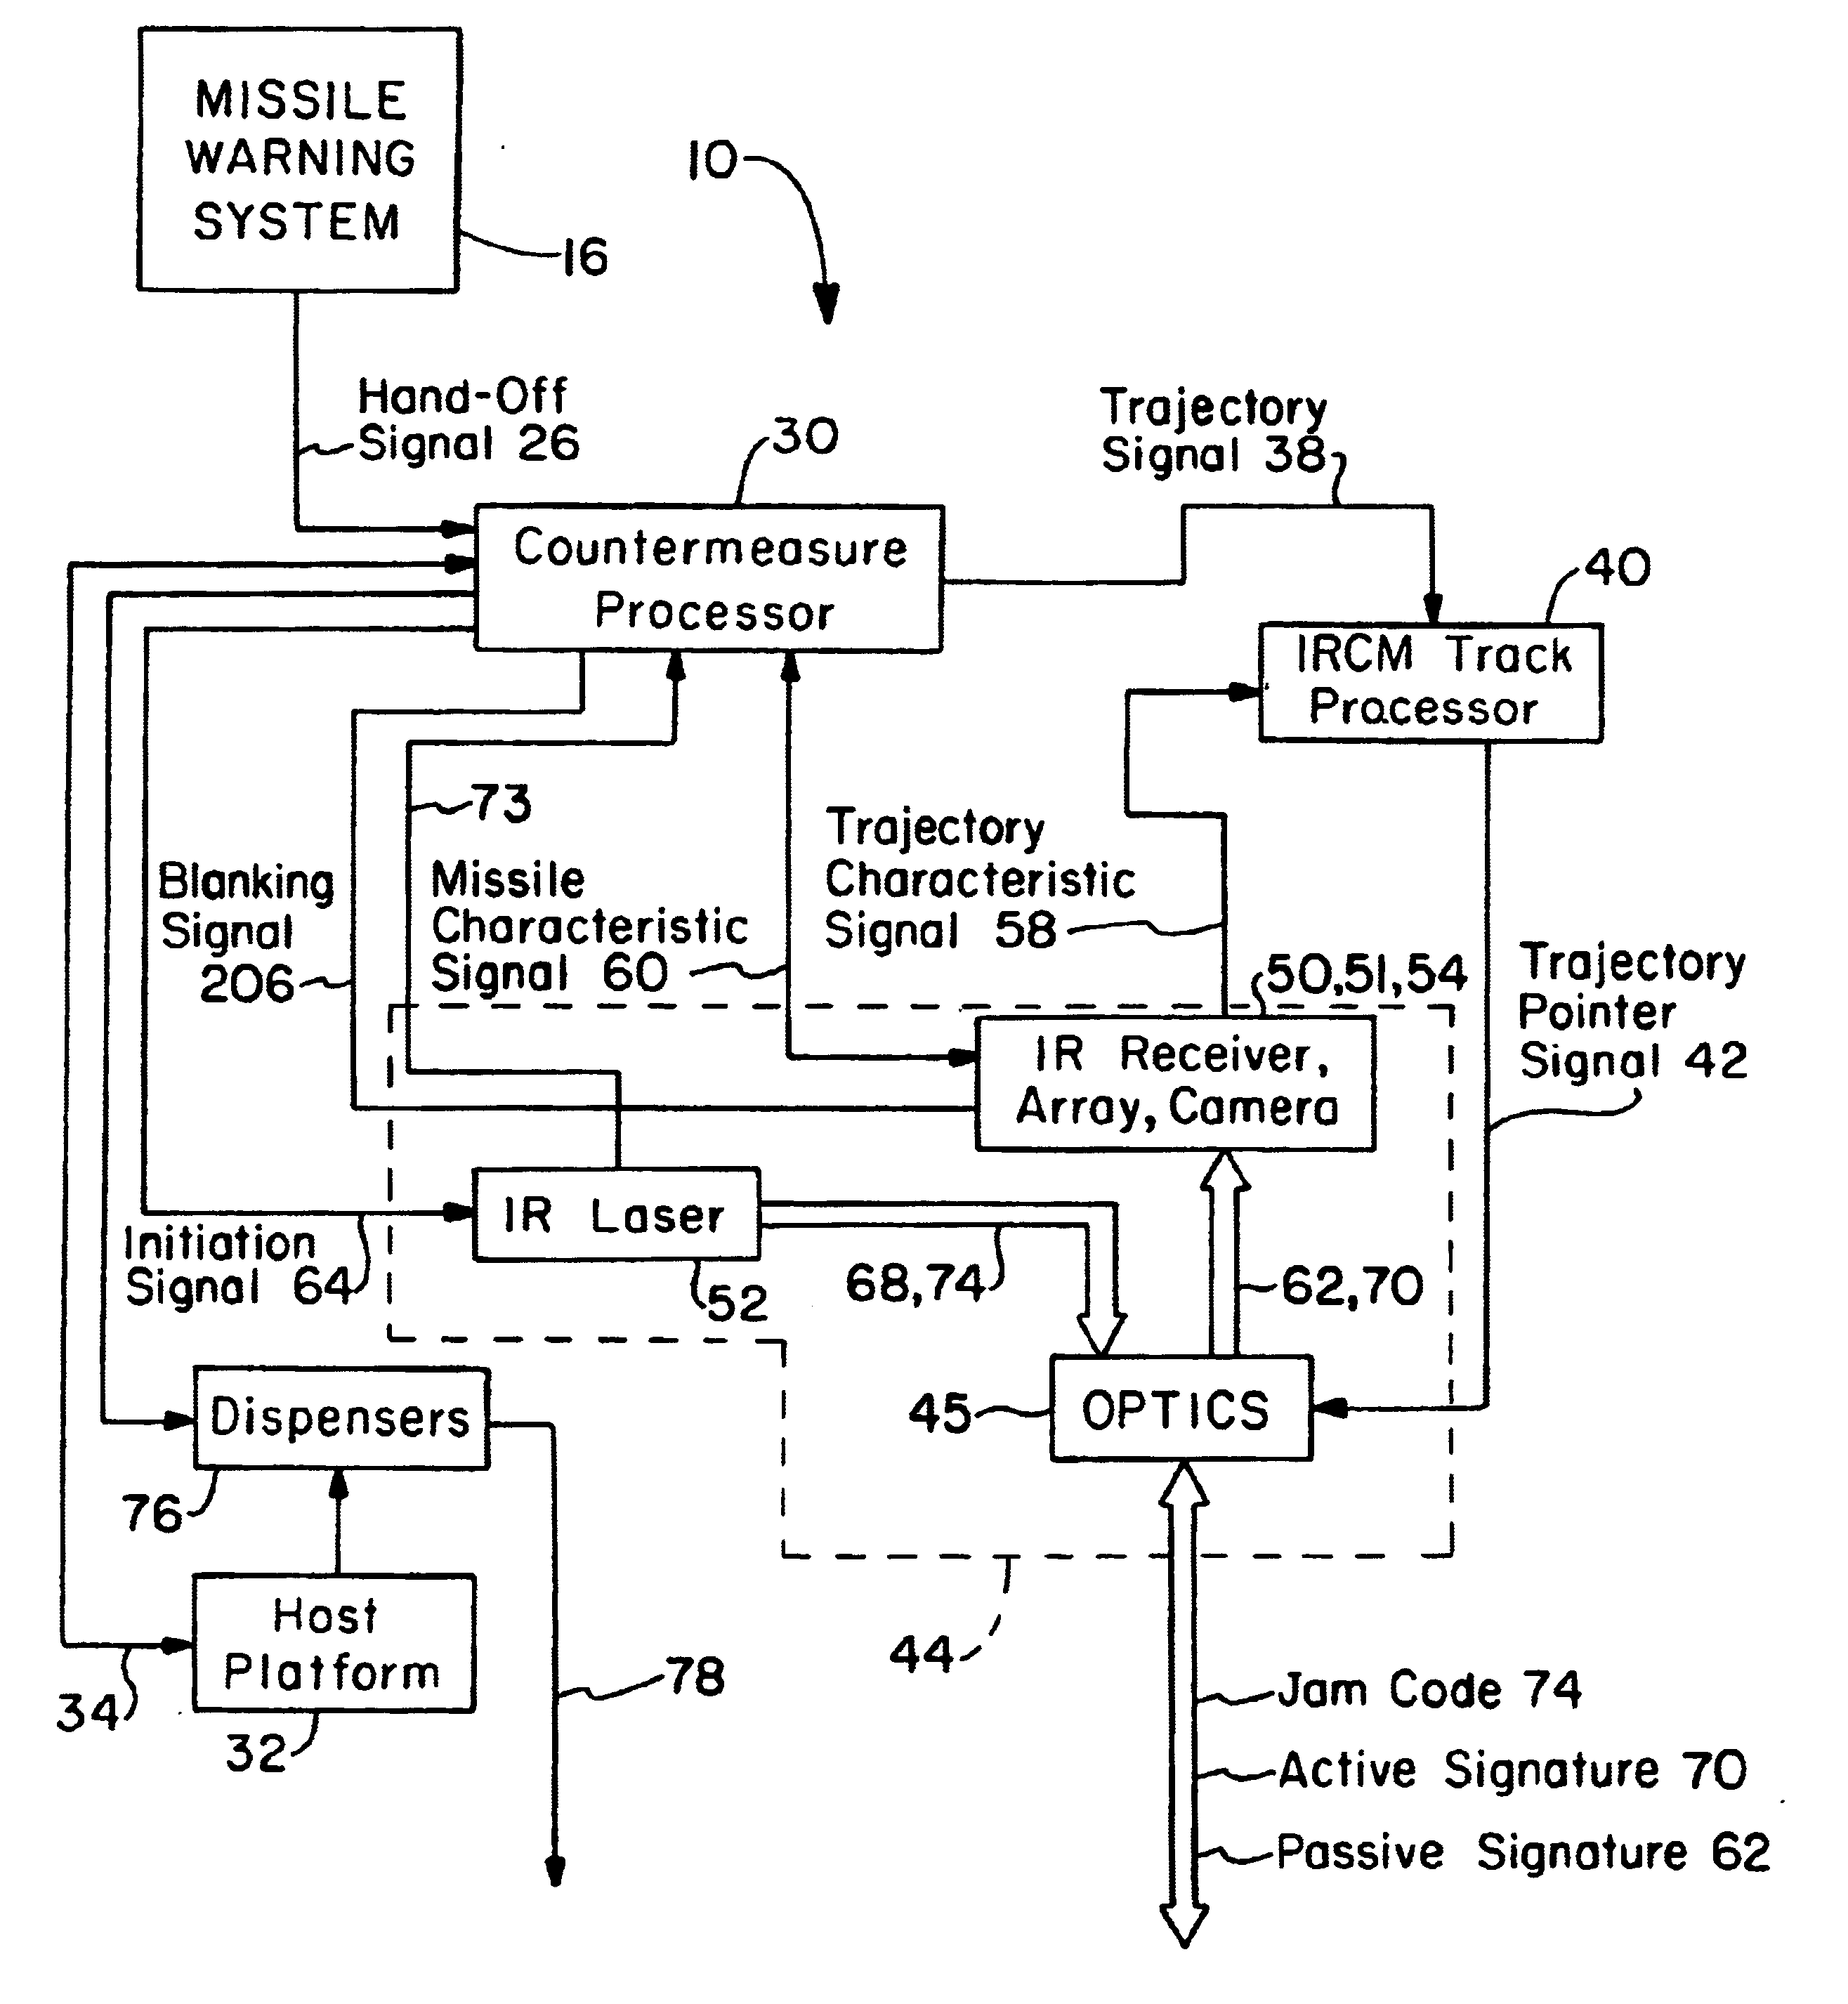 Closed-loop infrared countermeasure system using a high frame rate infrared receiver with nulling sequence